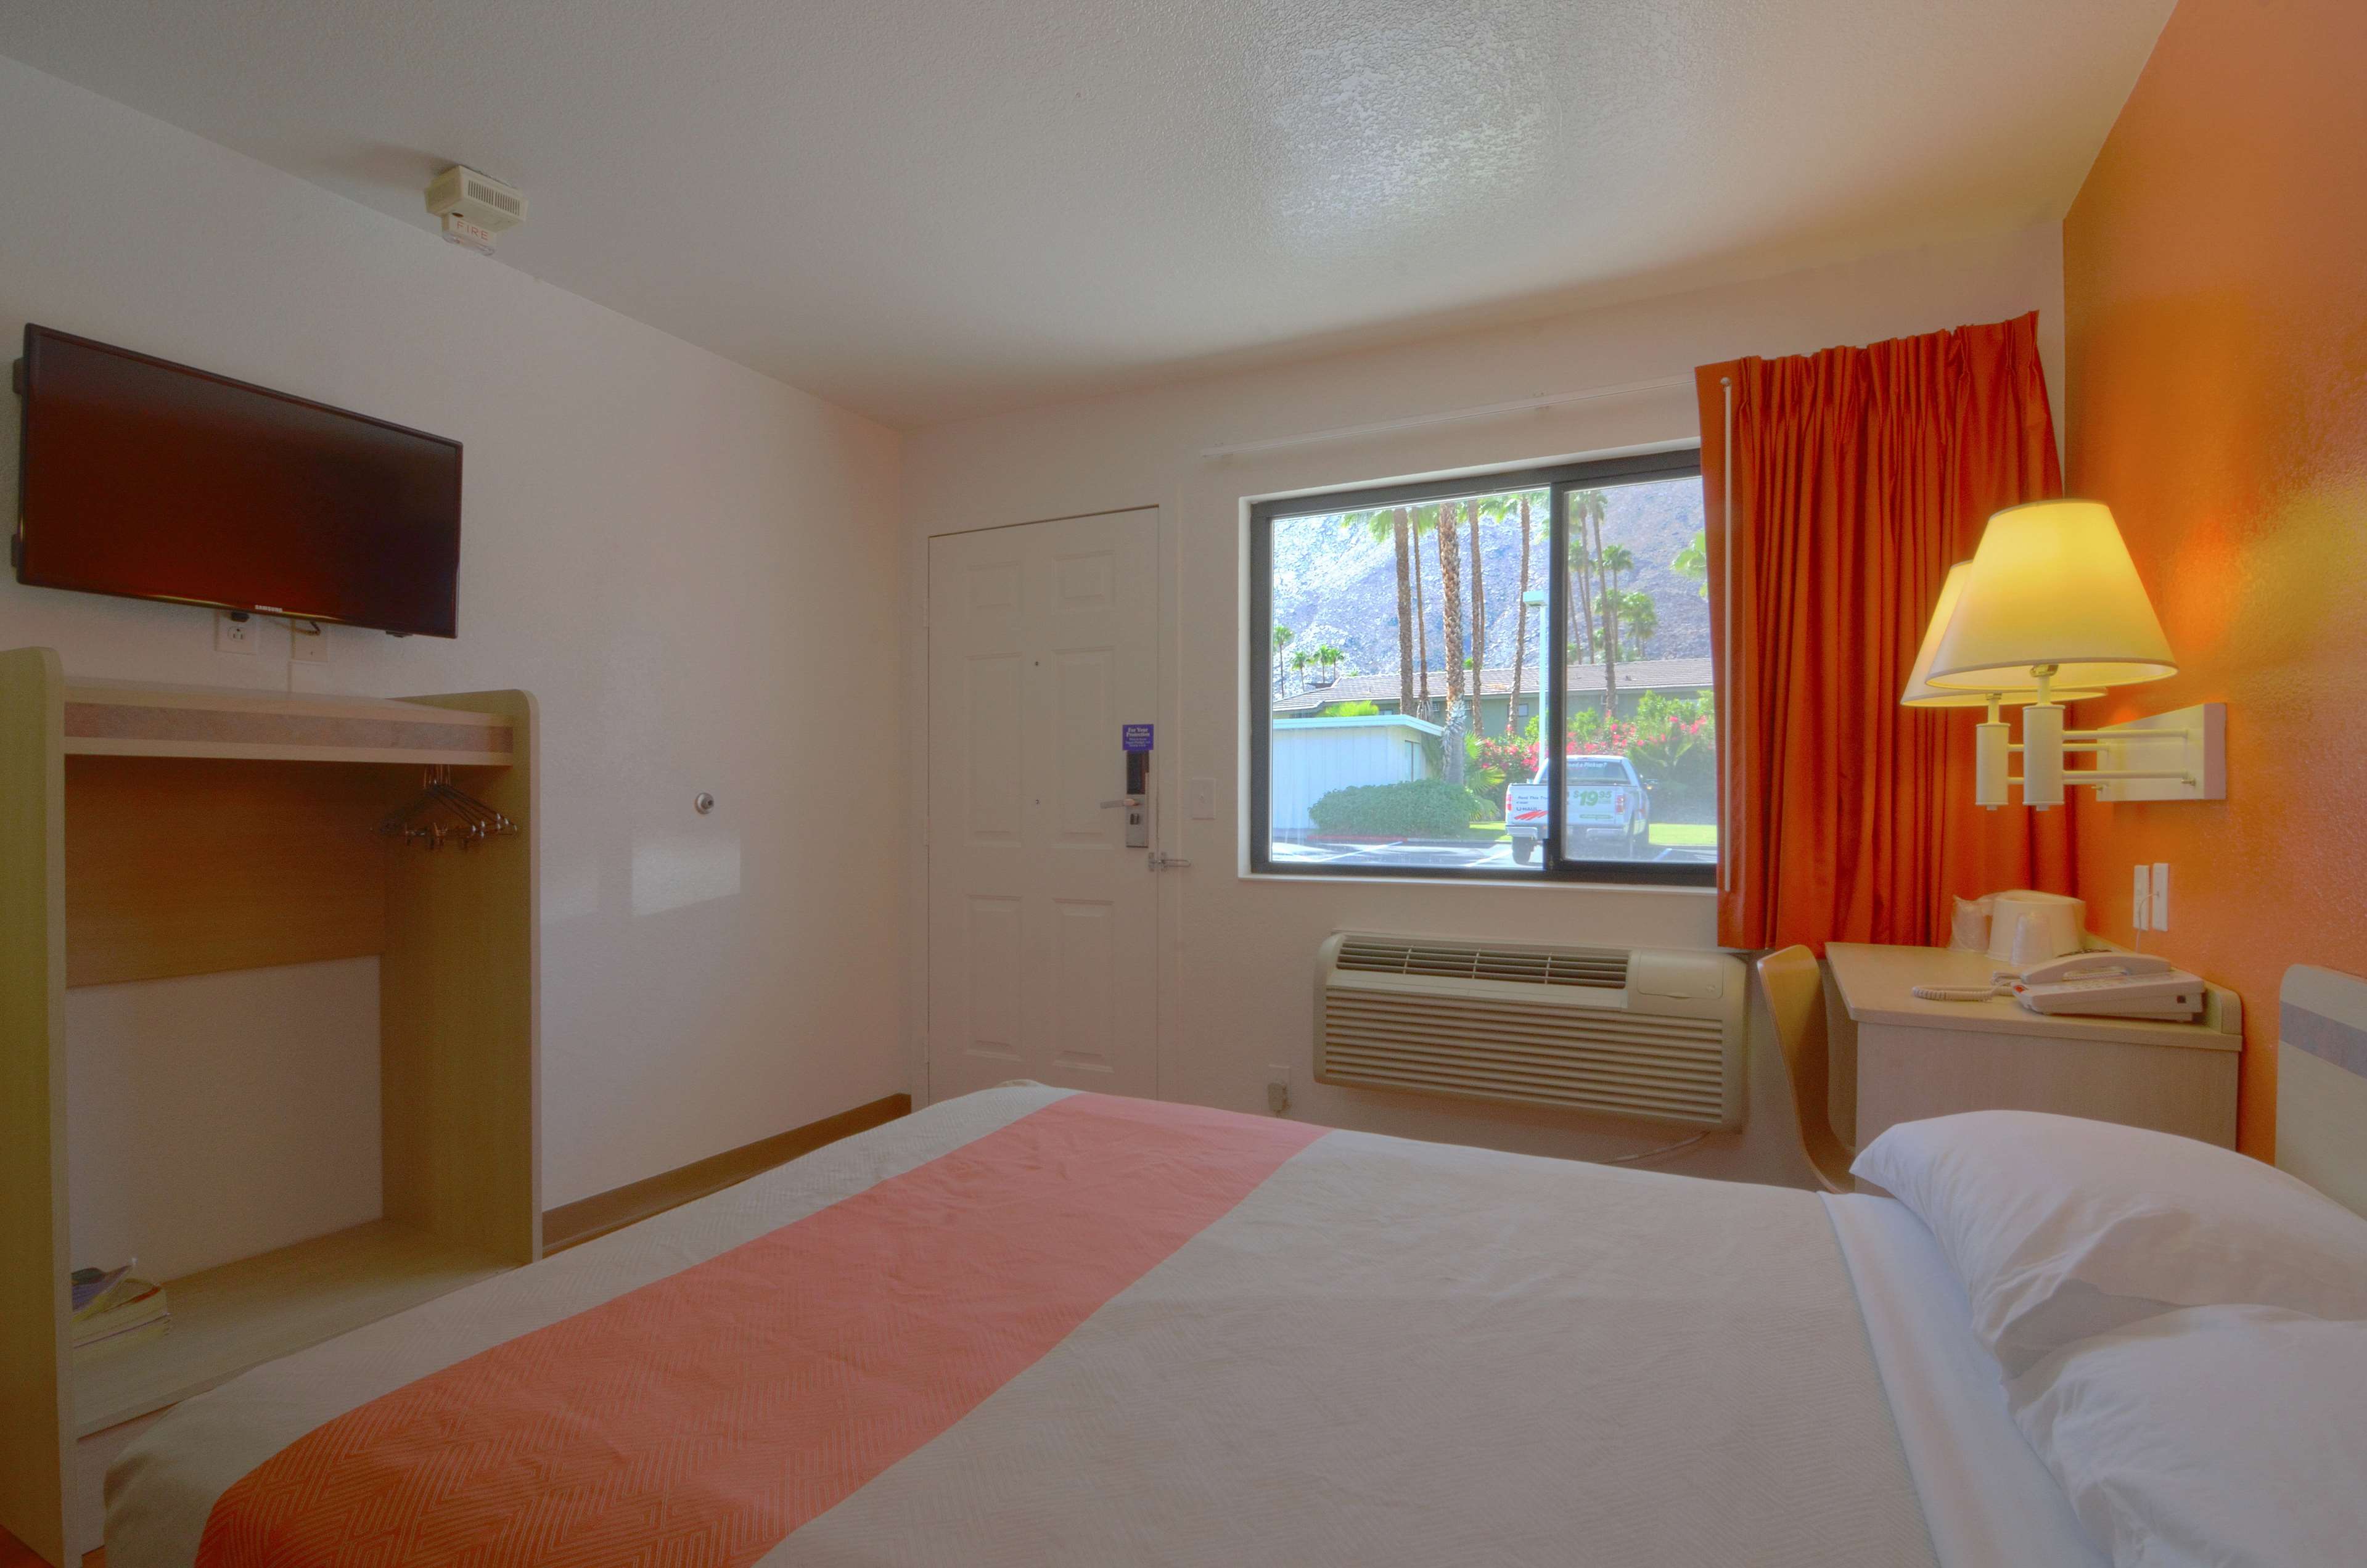 Motel 6 Palm Springs East - East Palm Canyon